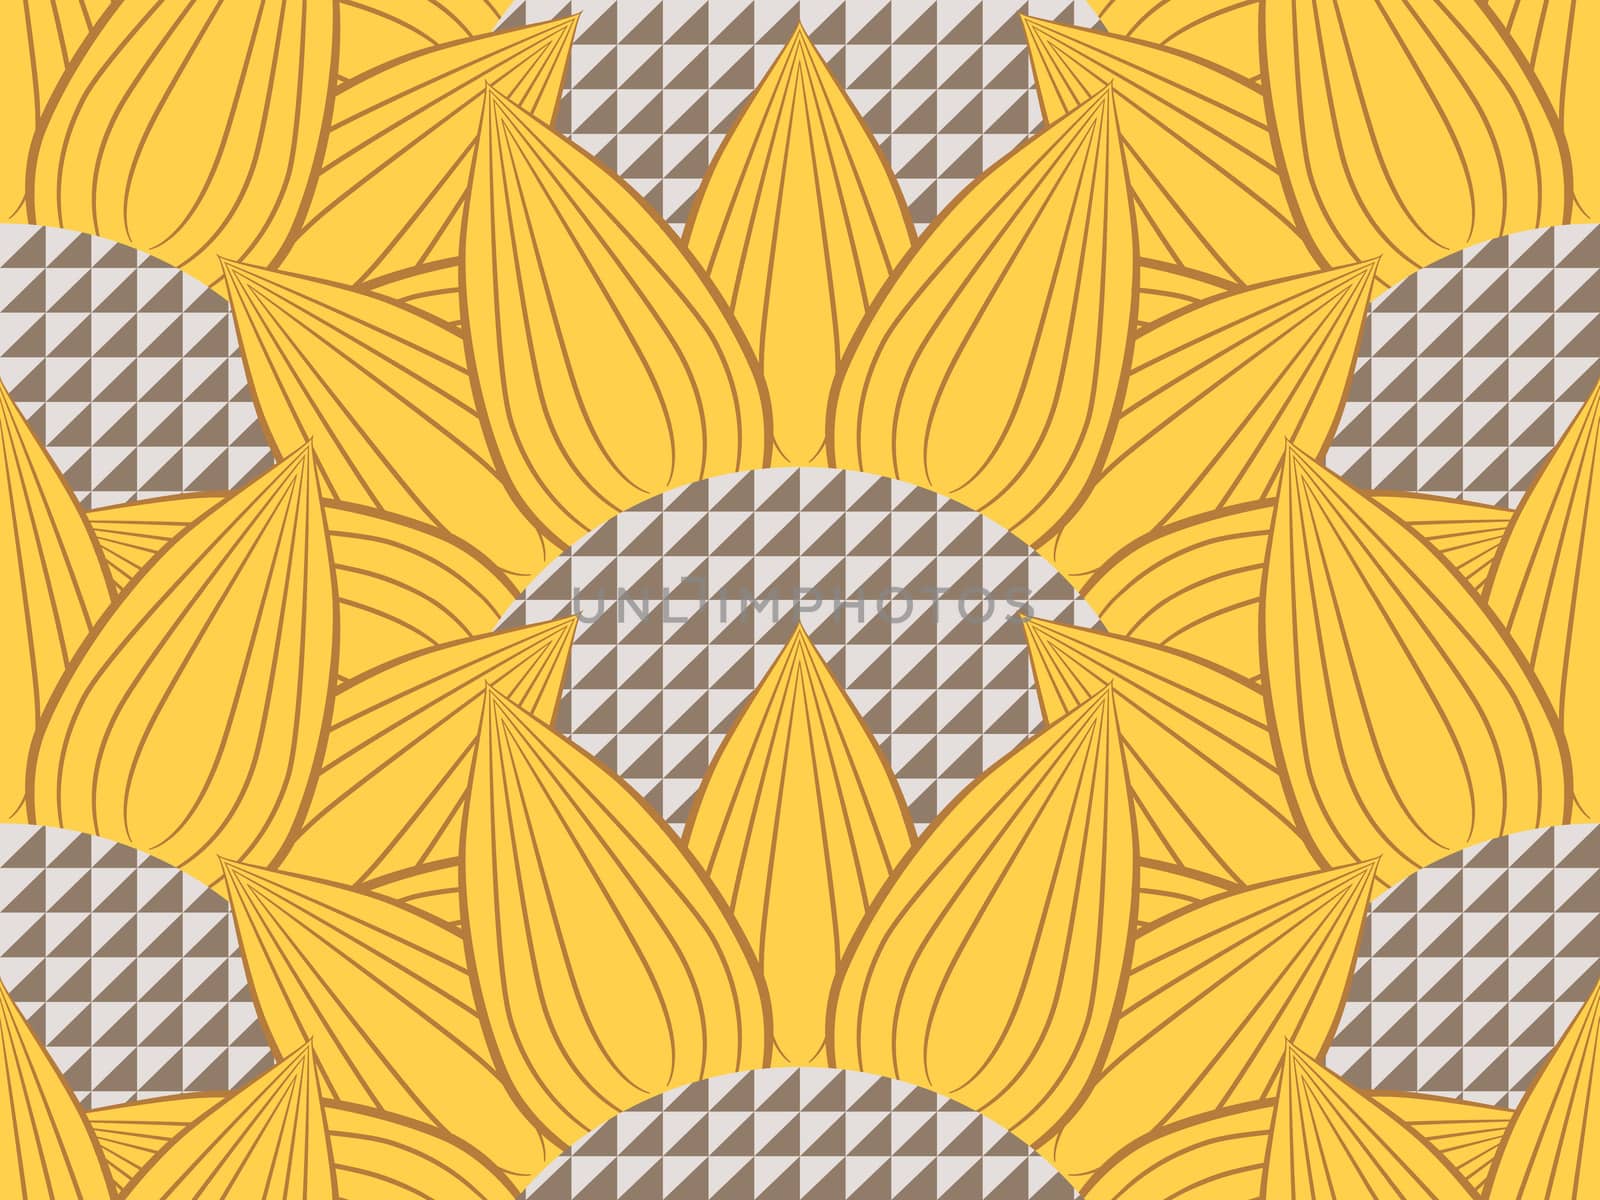 Pattern with sunflowers and Technology by Lixell